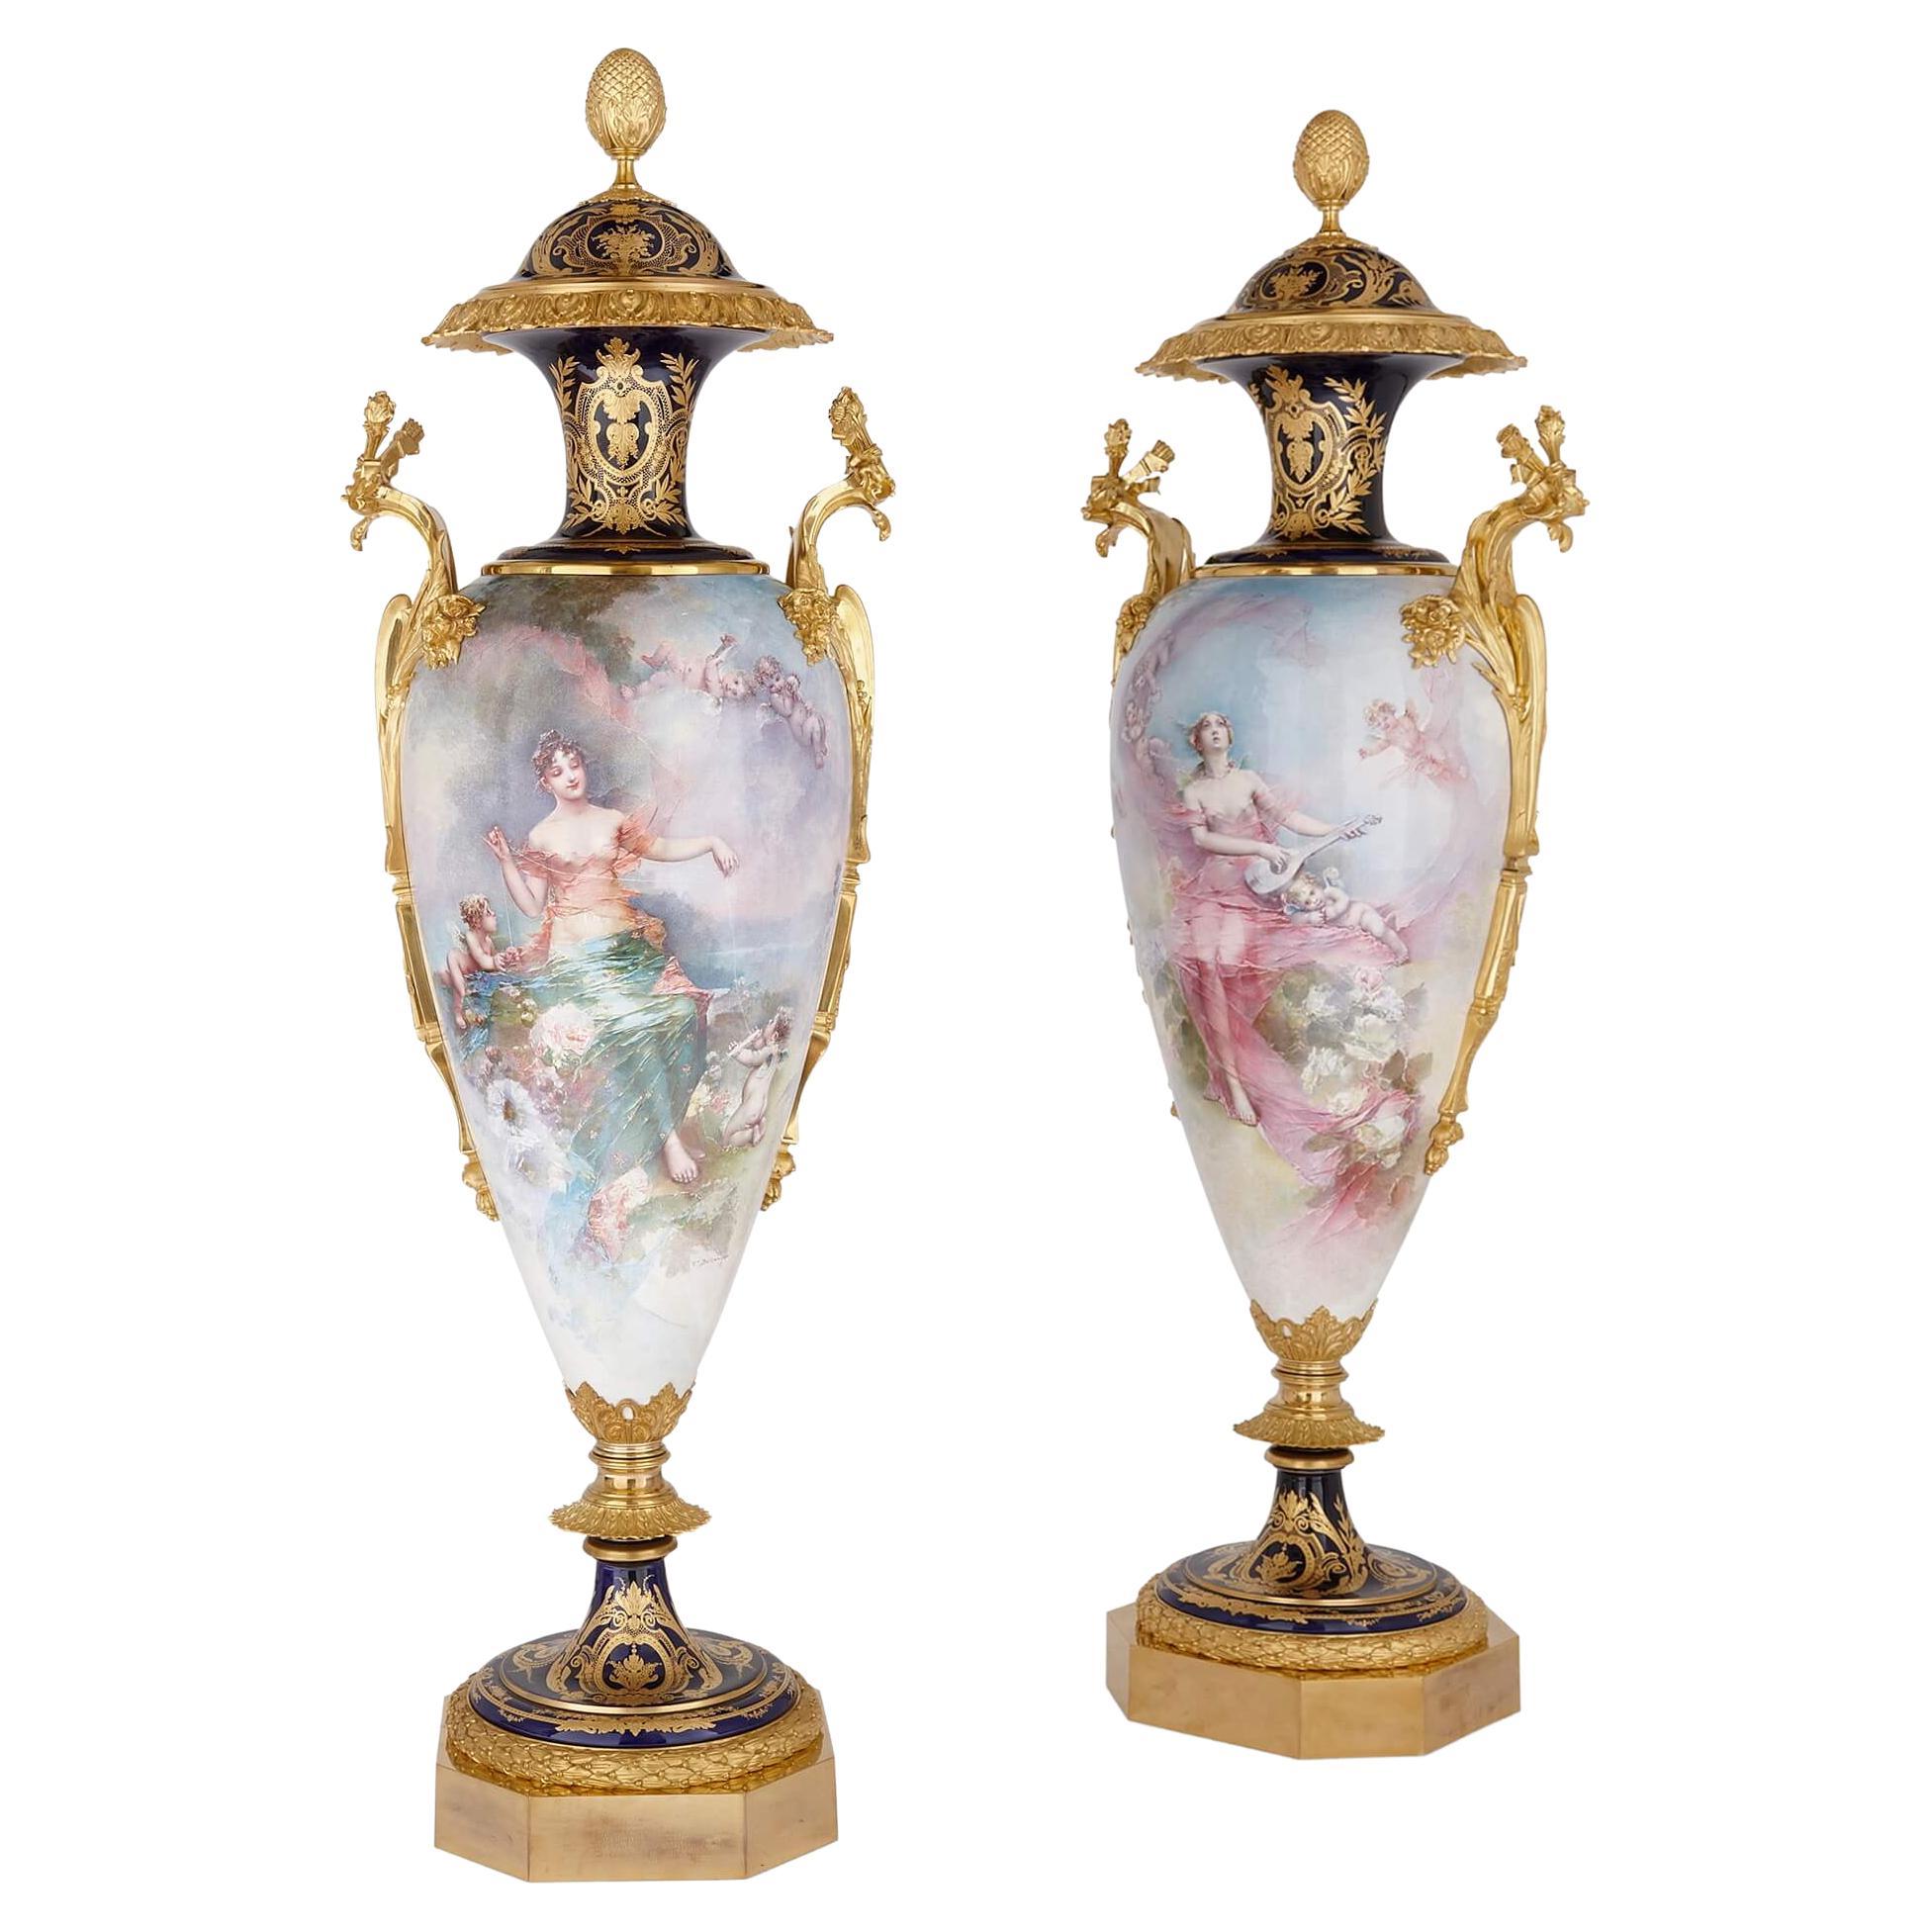 Pair of Very Large French Sèvres Style Porcelain and Ormolu Vases